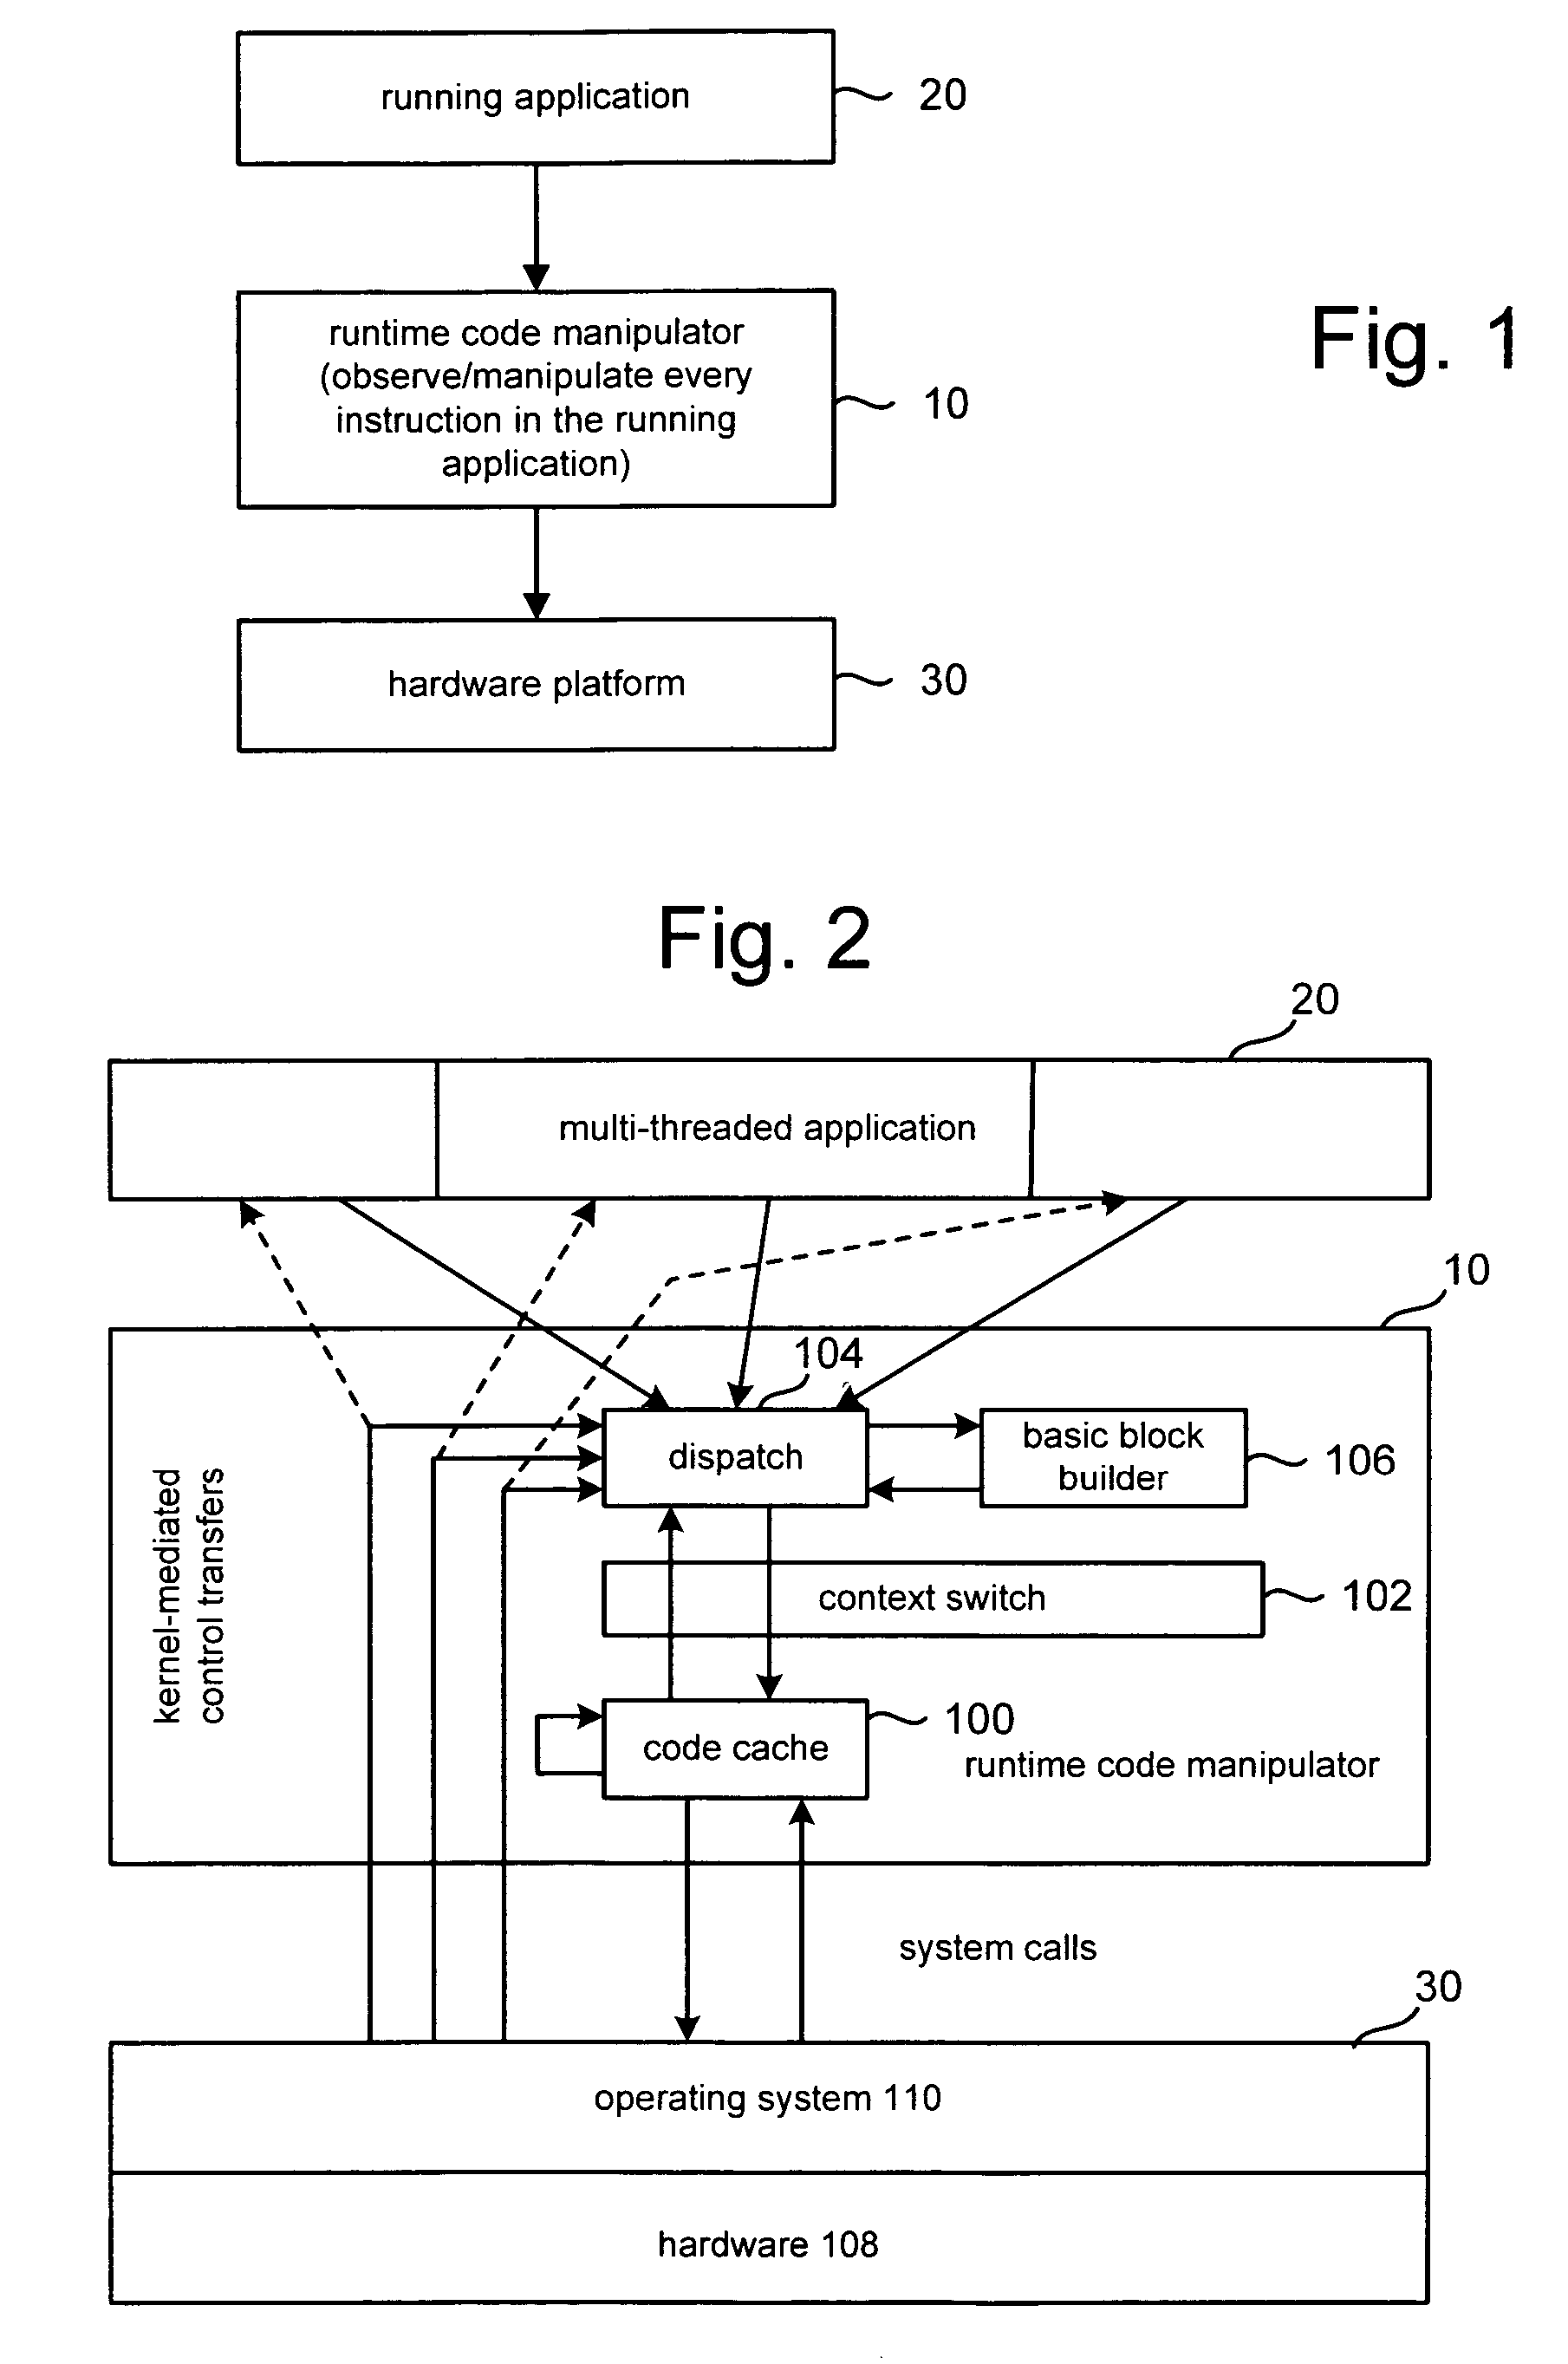 Adaptive cache sizing based on monitoring of regenerated and replaced cache entries